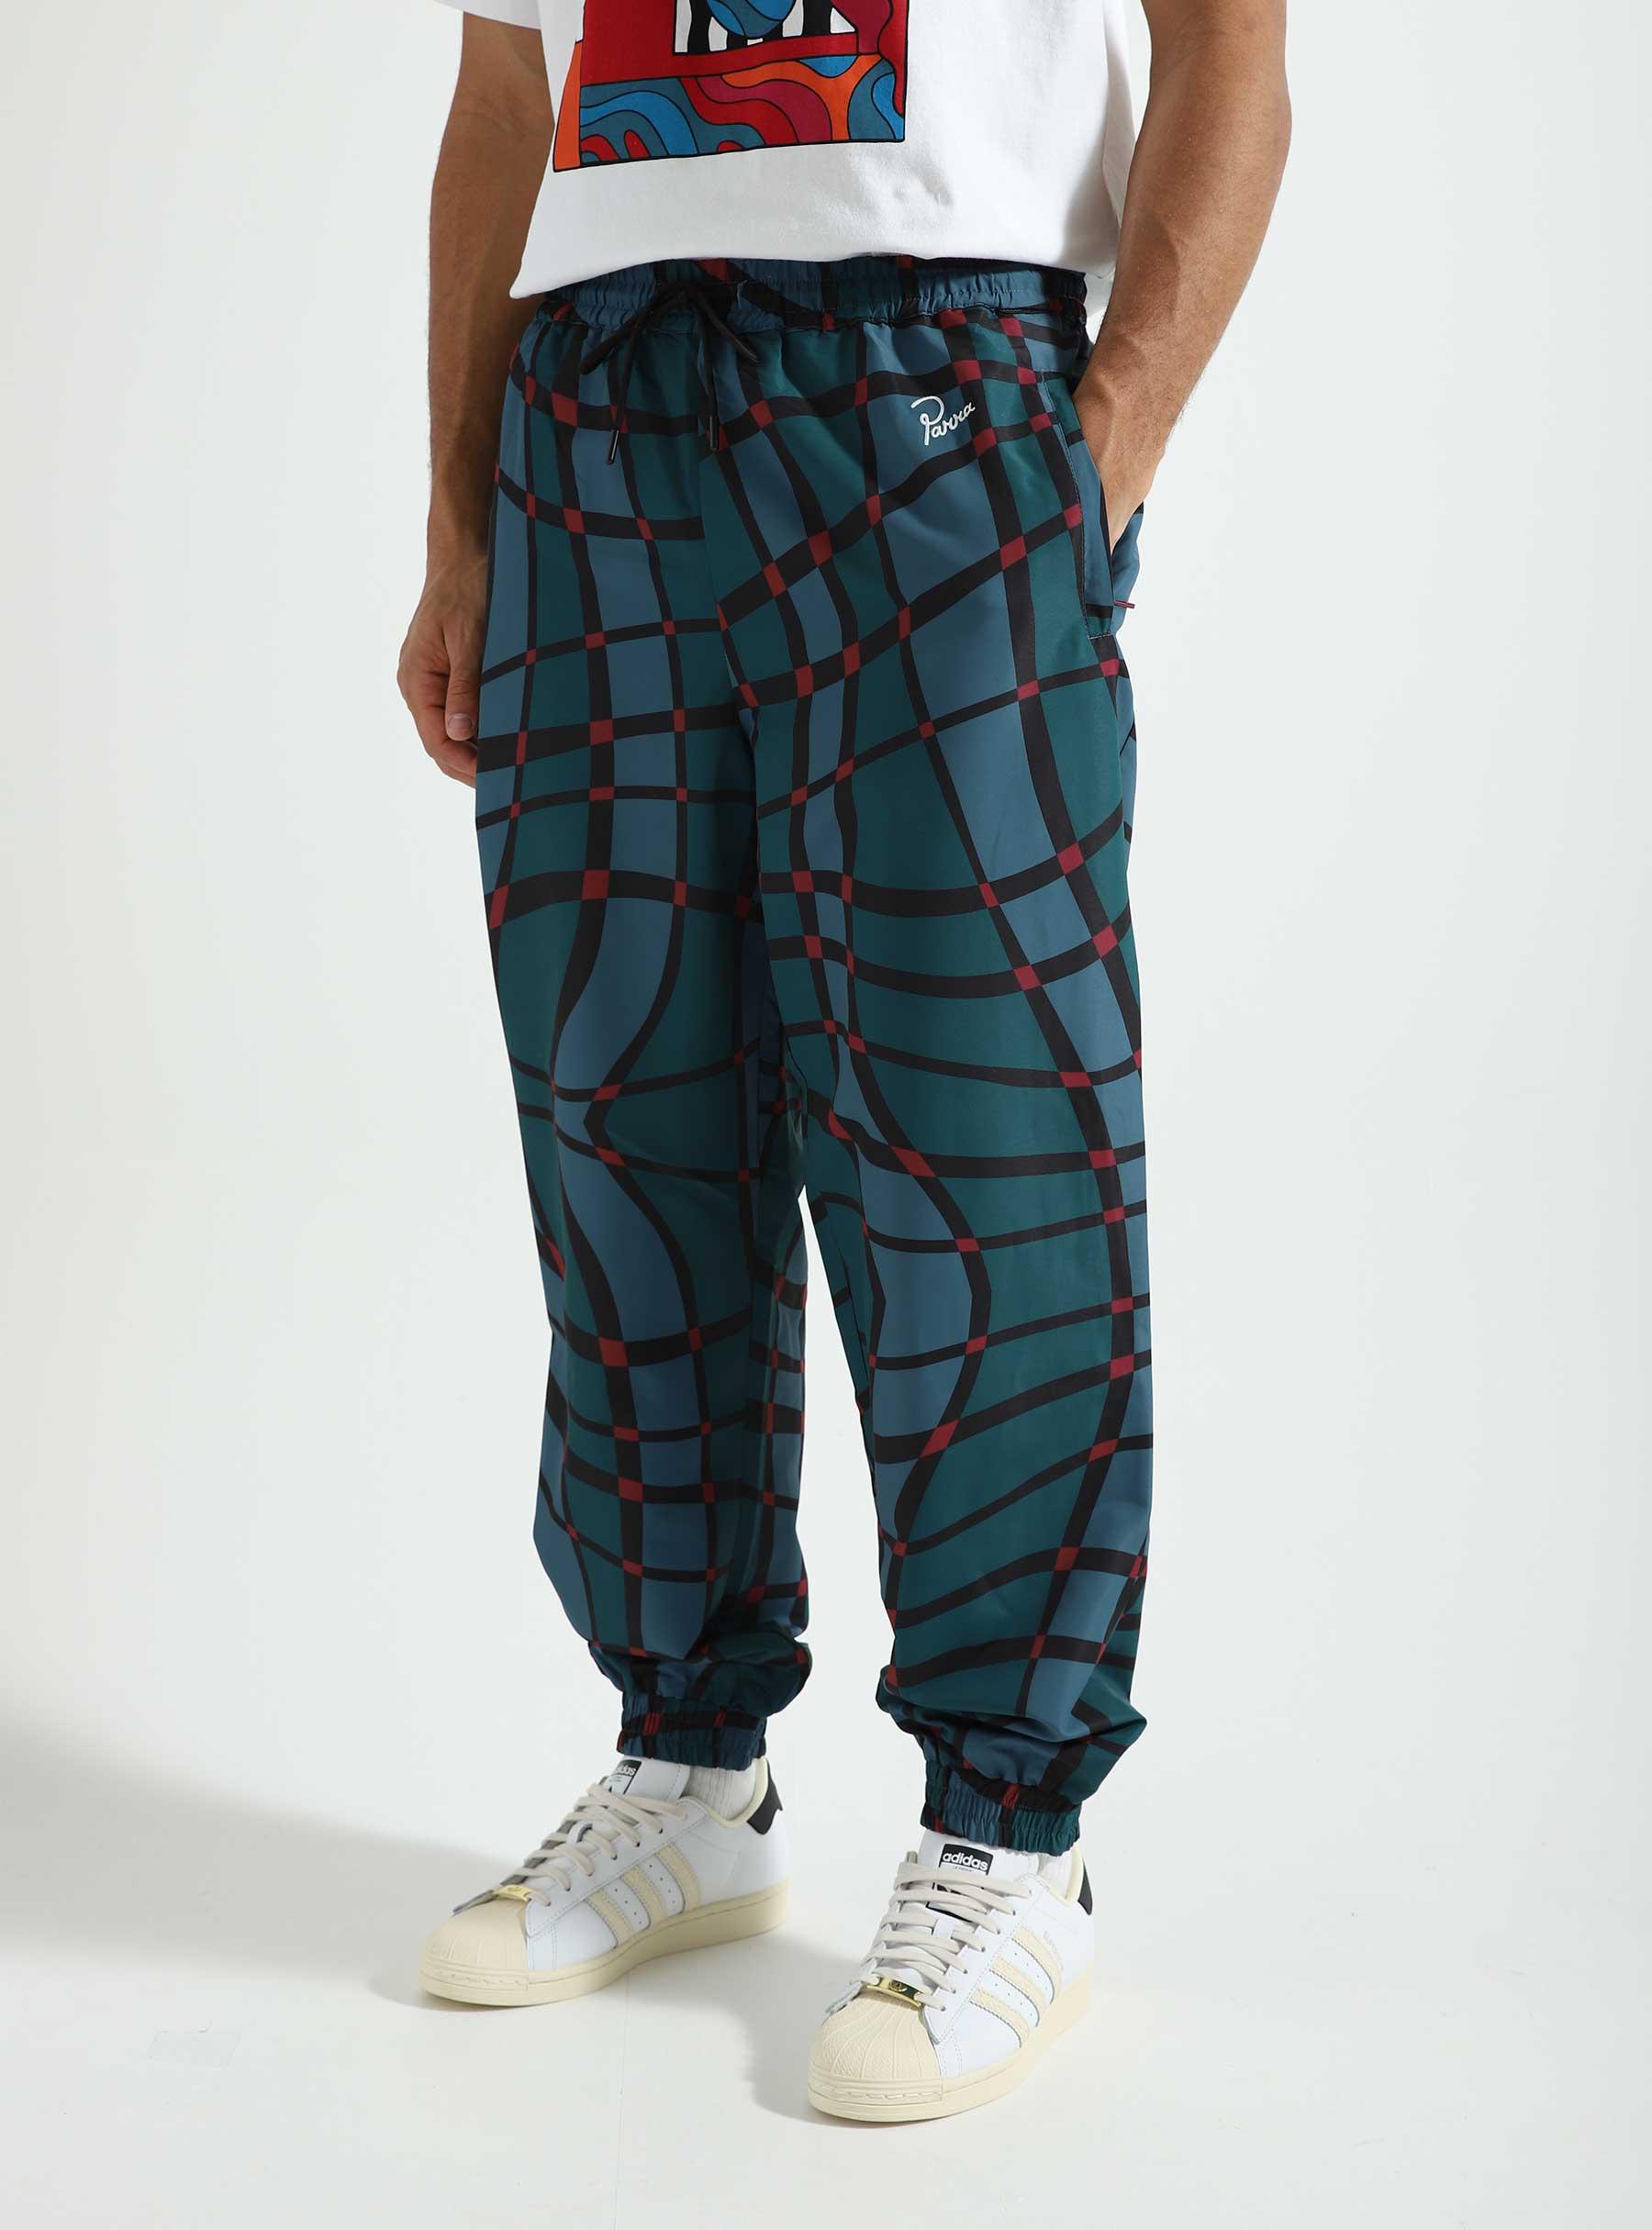 Squared Waves Pattern Track Pants Multi Check 49325